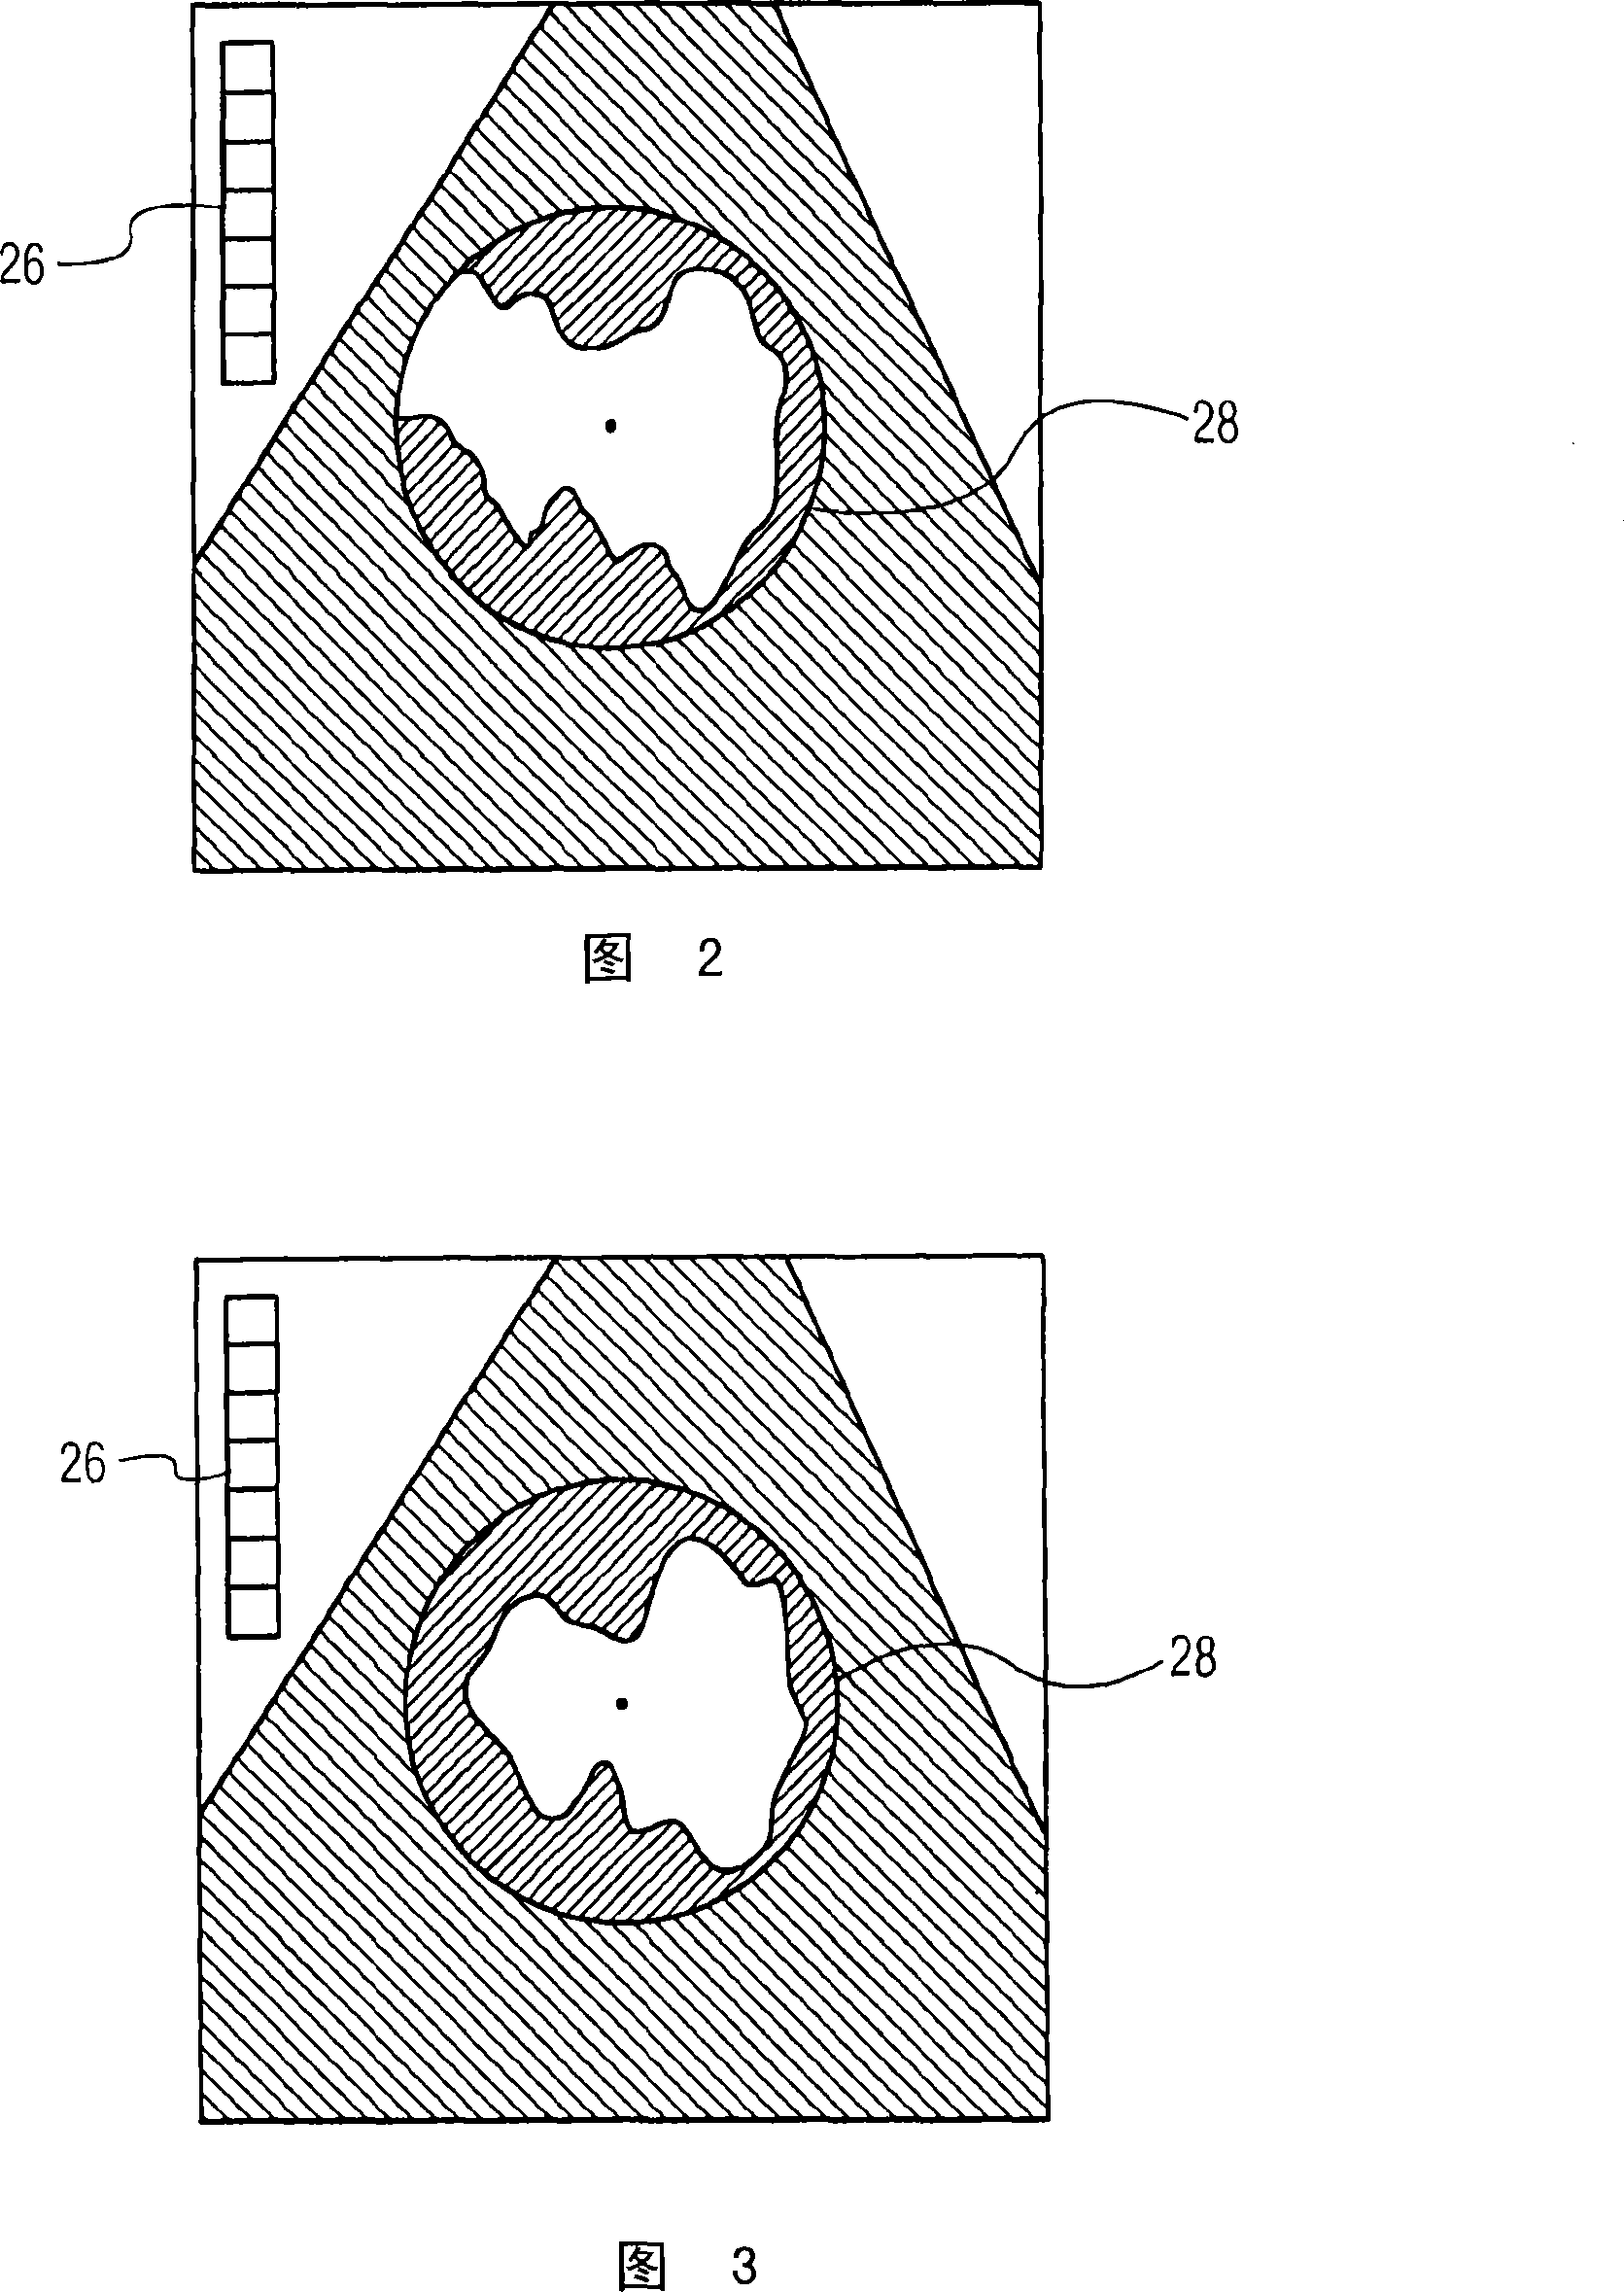 Targeted additive gain tool for processing ultrasound images